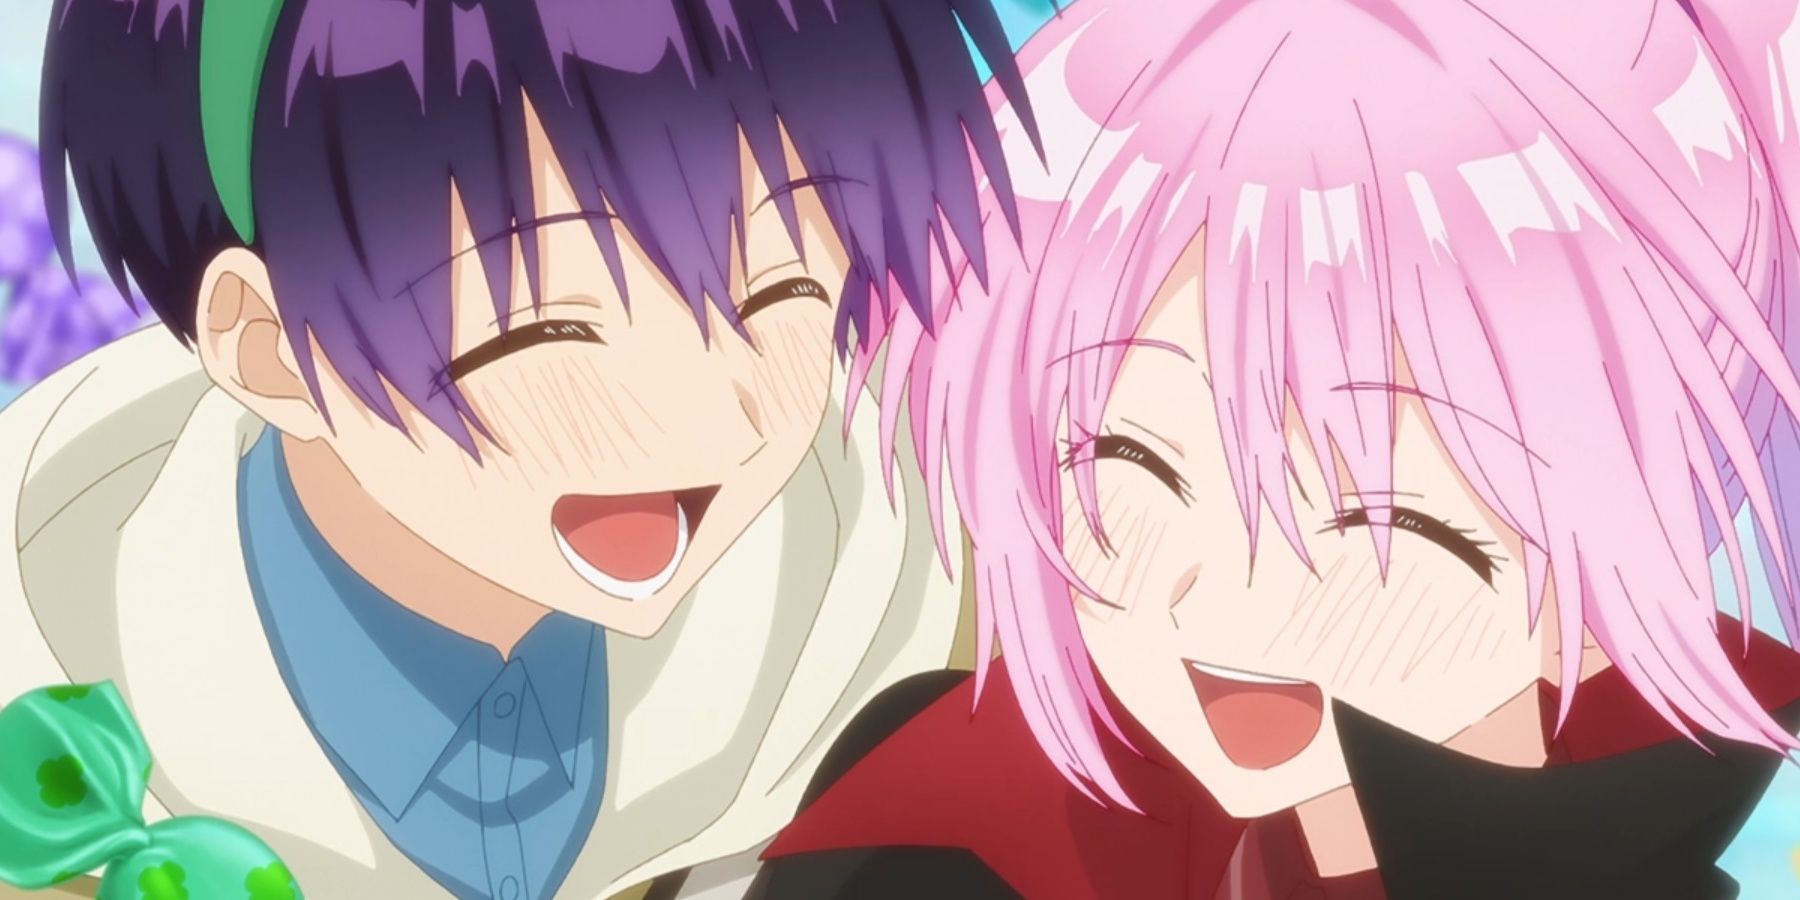 Shikimori and Izumi smiling and laughing together in Shikimori's Not Just A Cutie.